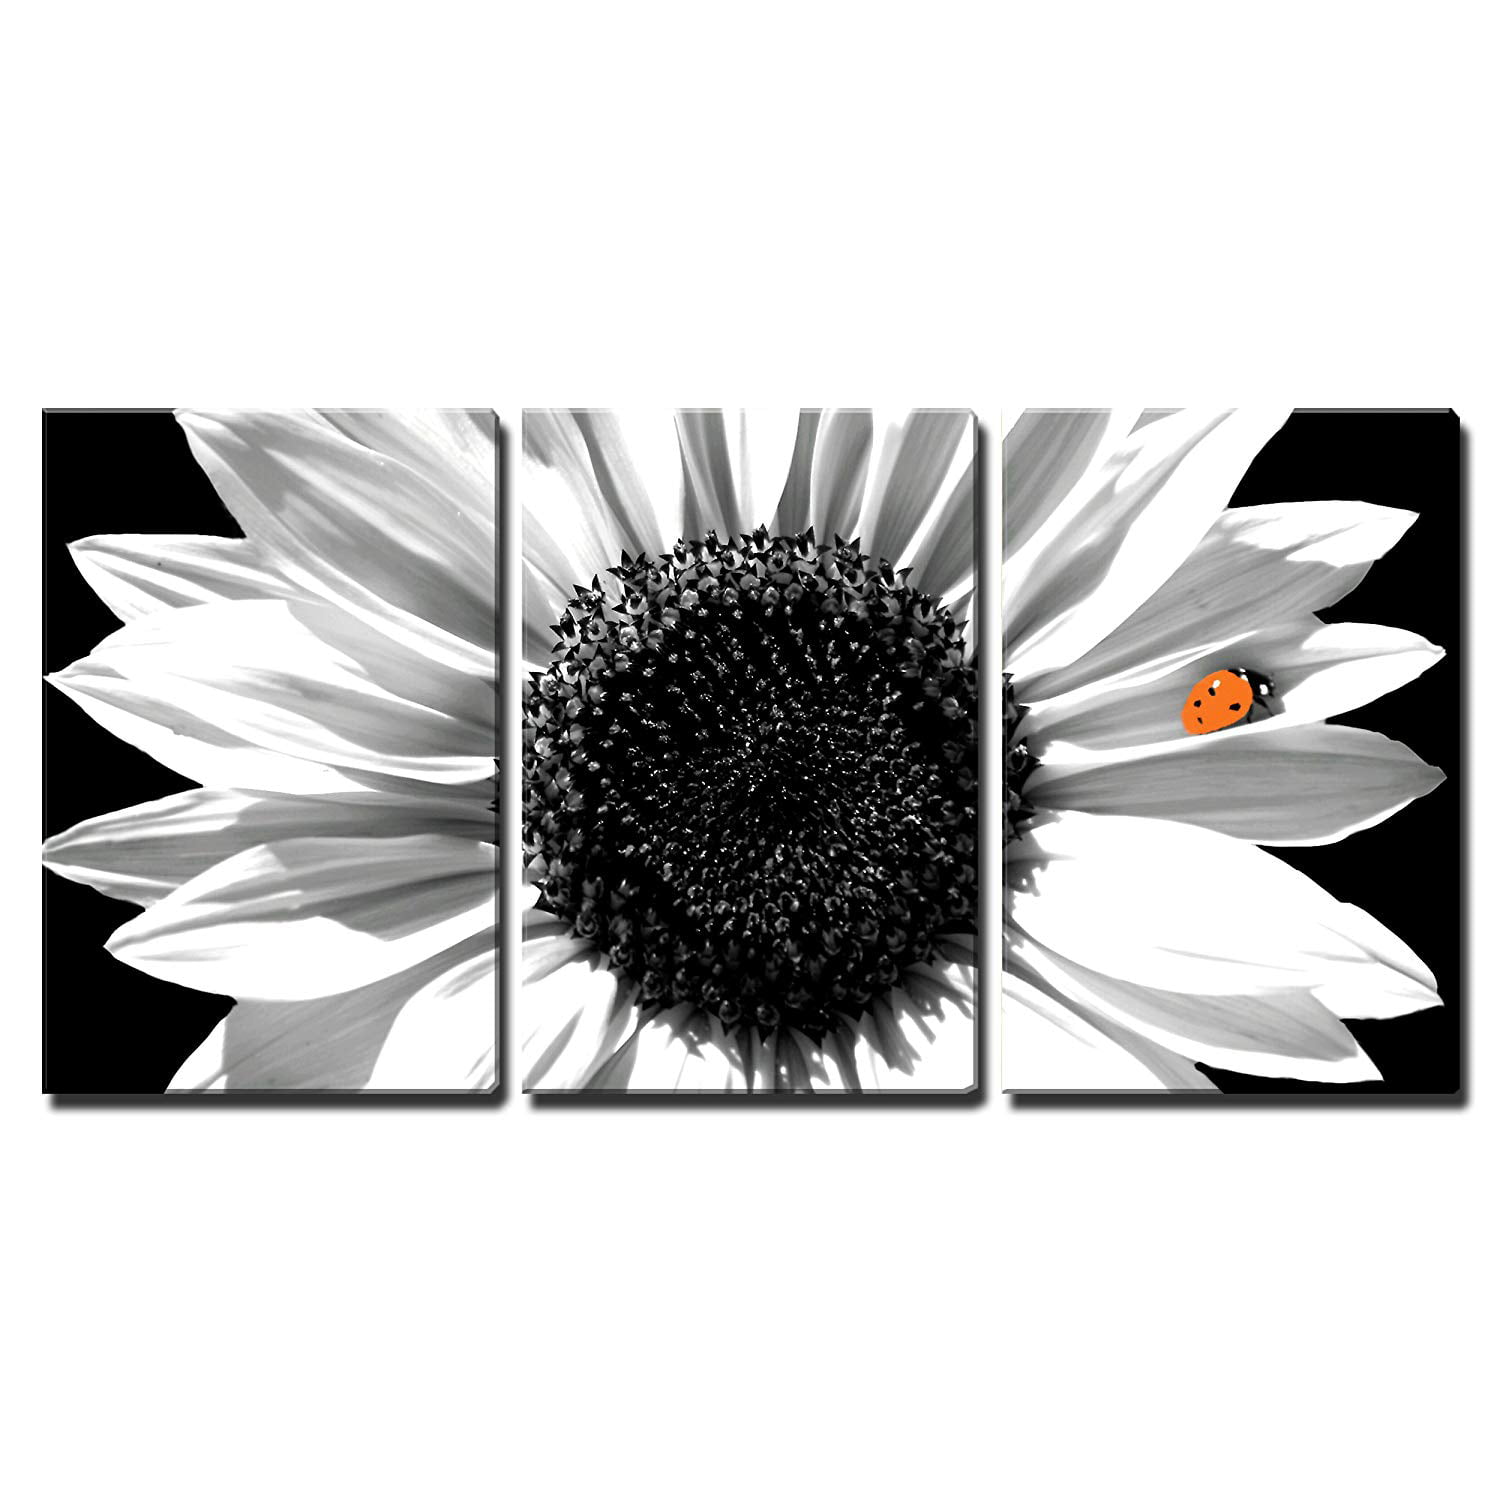 A340 Ladybug Red Sunflower  Funky Animal Canvas Wall Art Large Picture Prints 